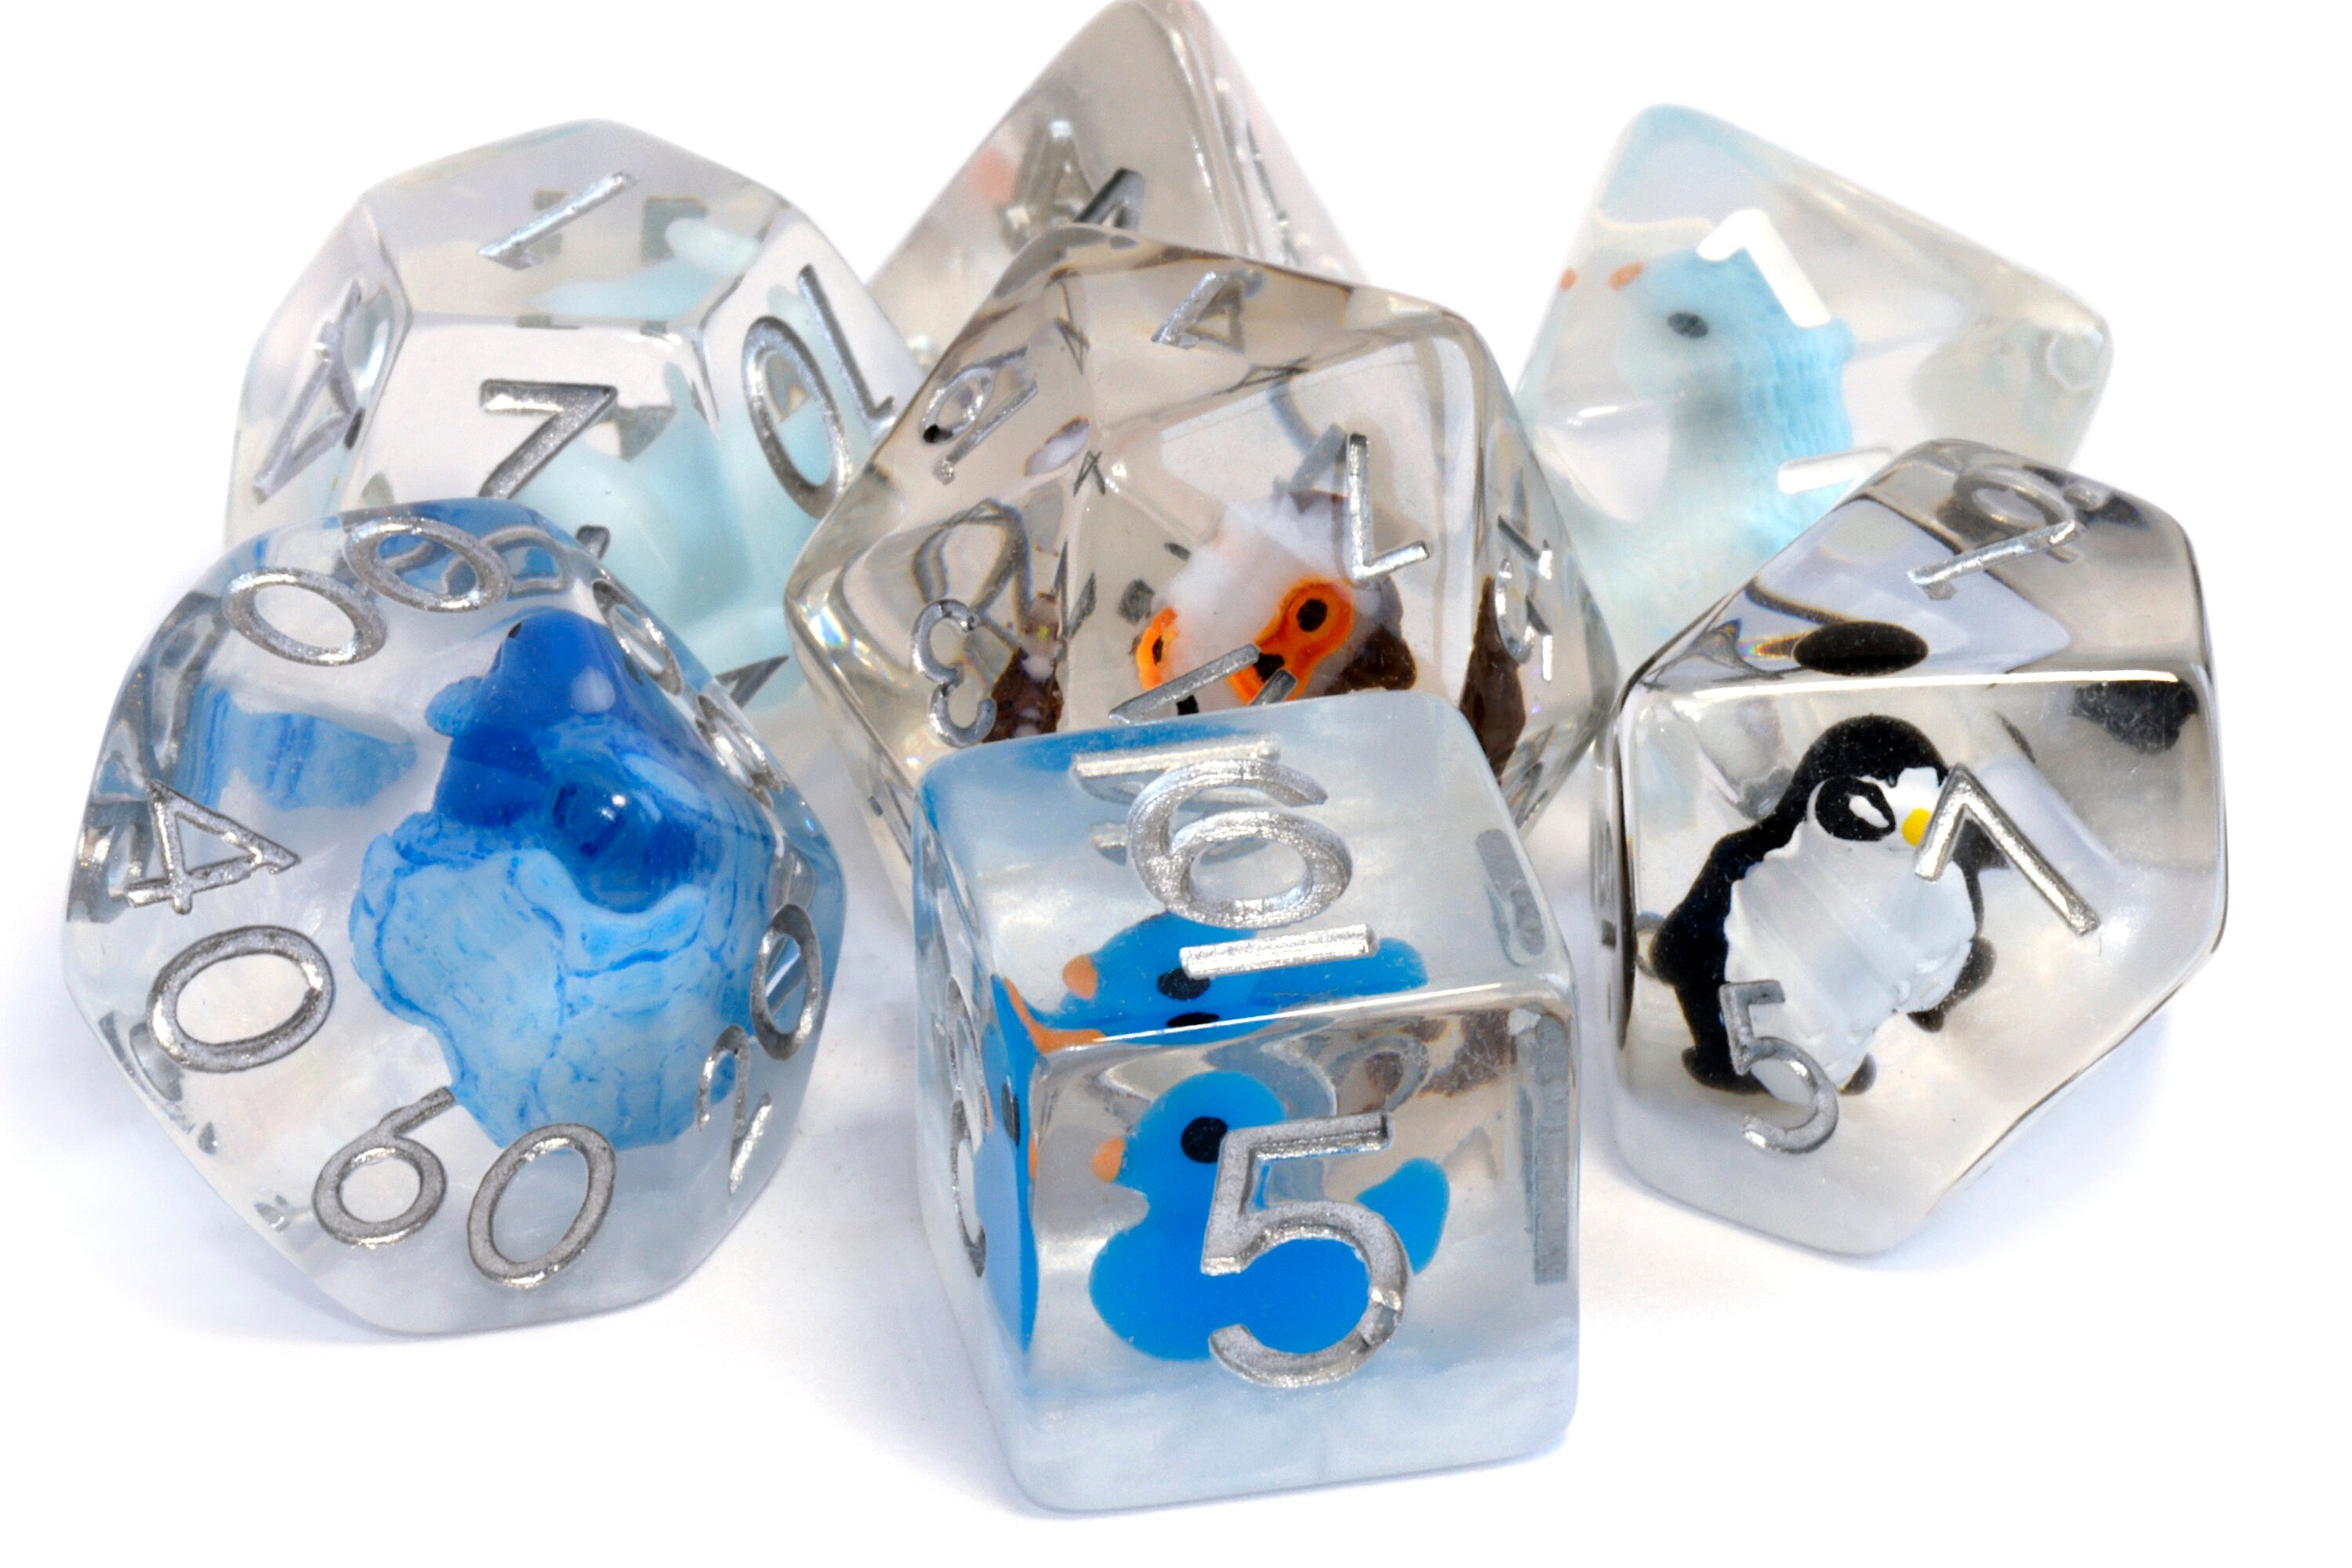 Winter critters dice box and mixed animals dice set